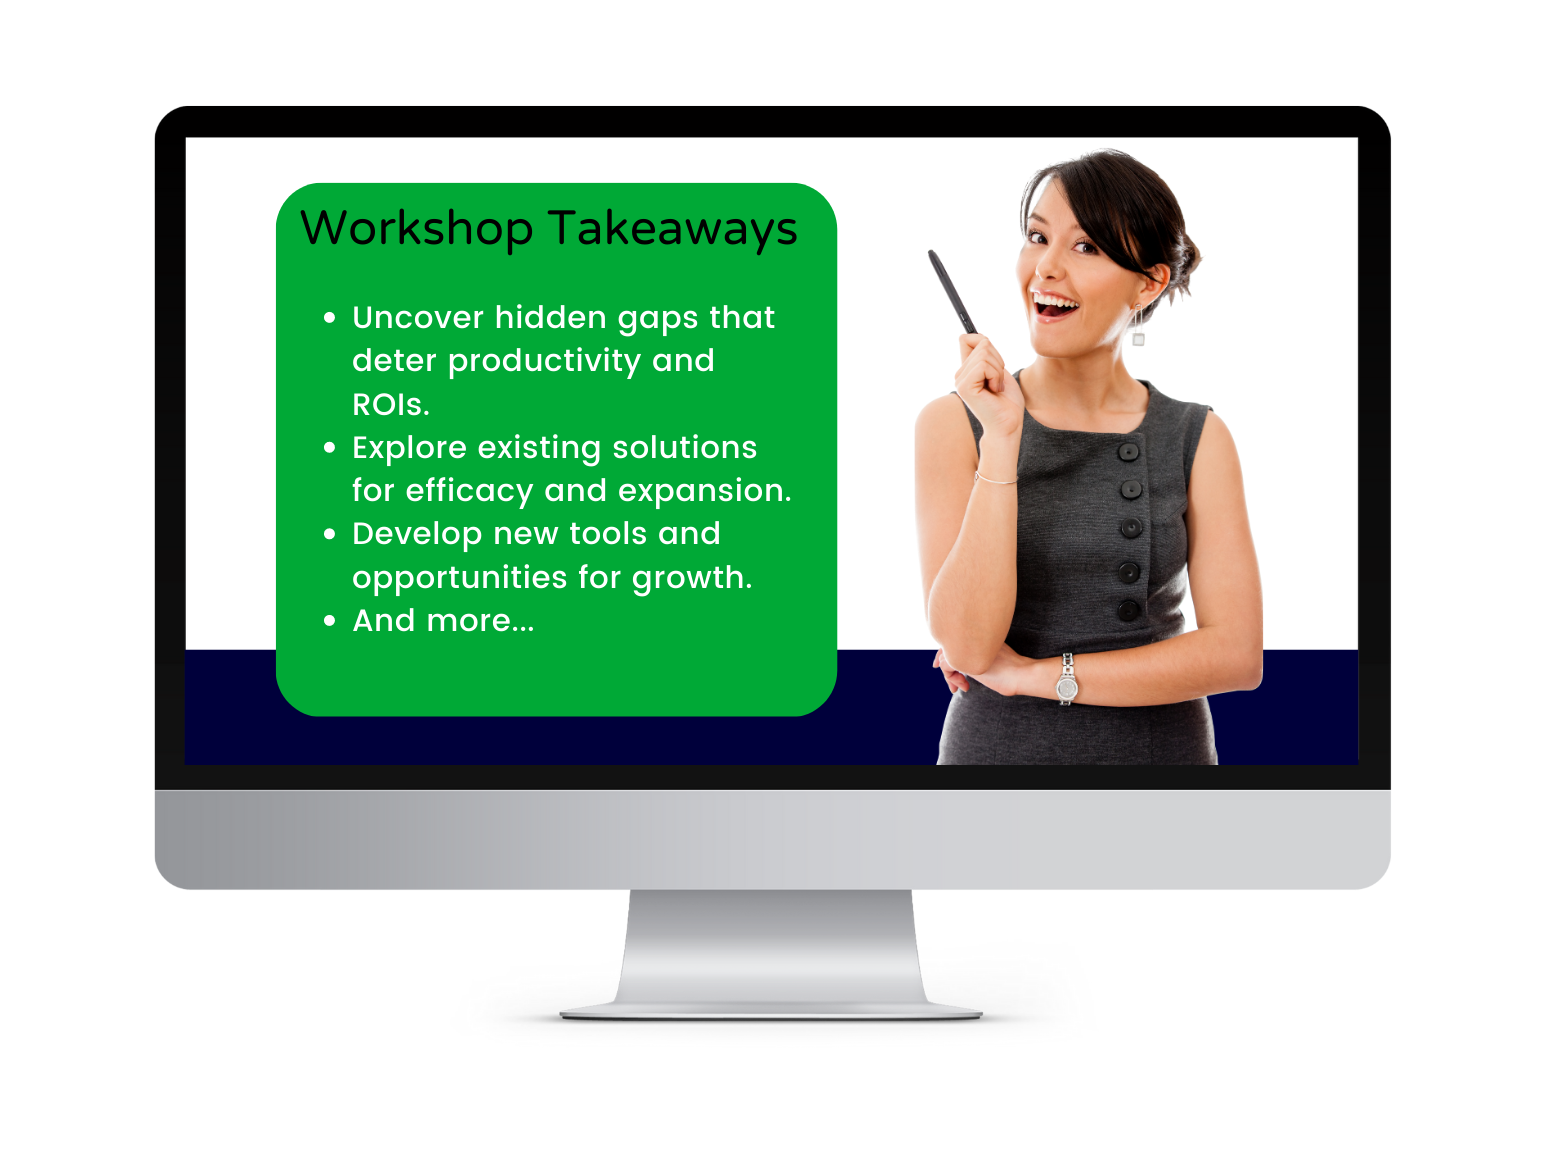 a computer screen displays a presentation about workshop takeaways